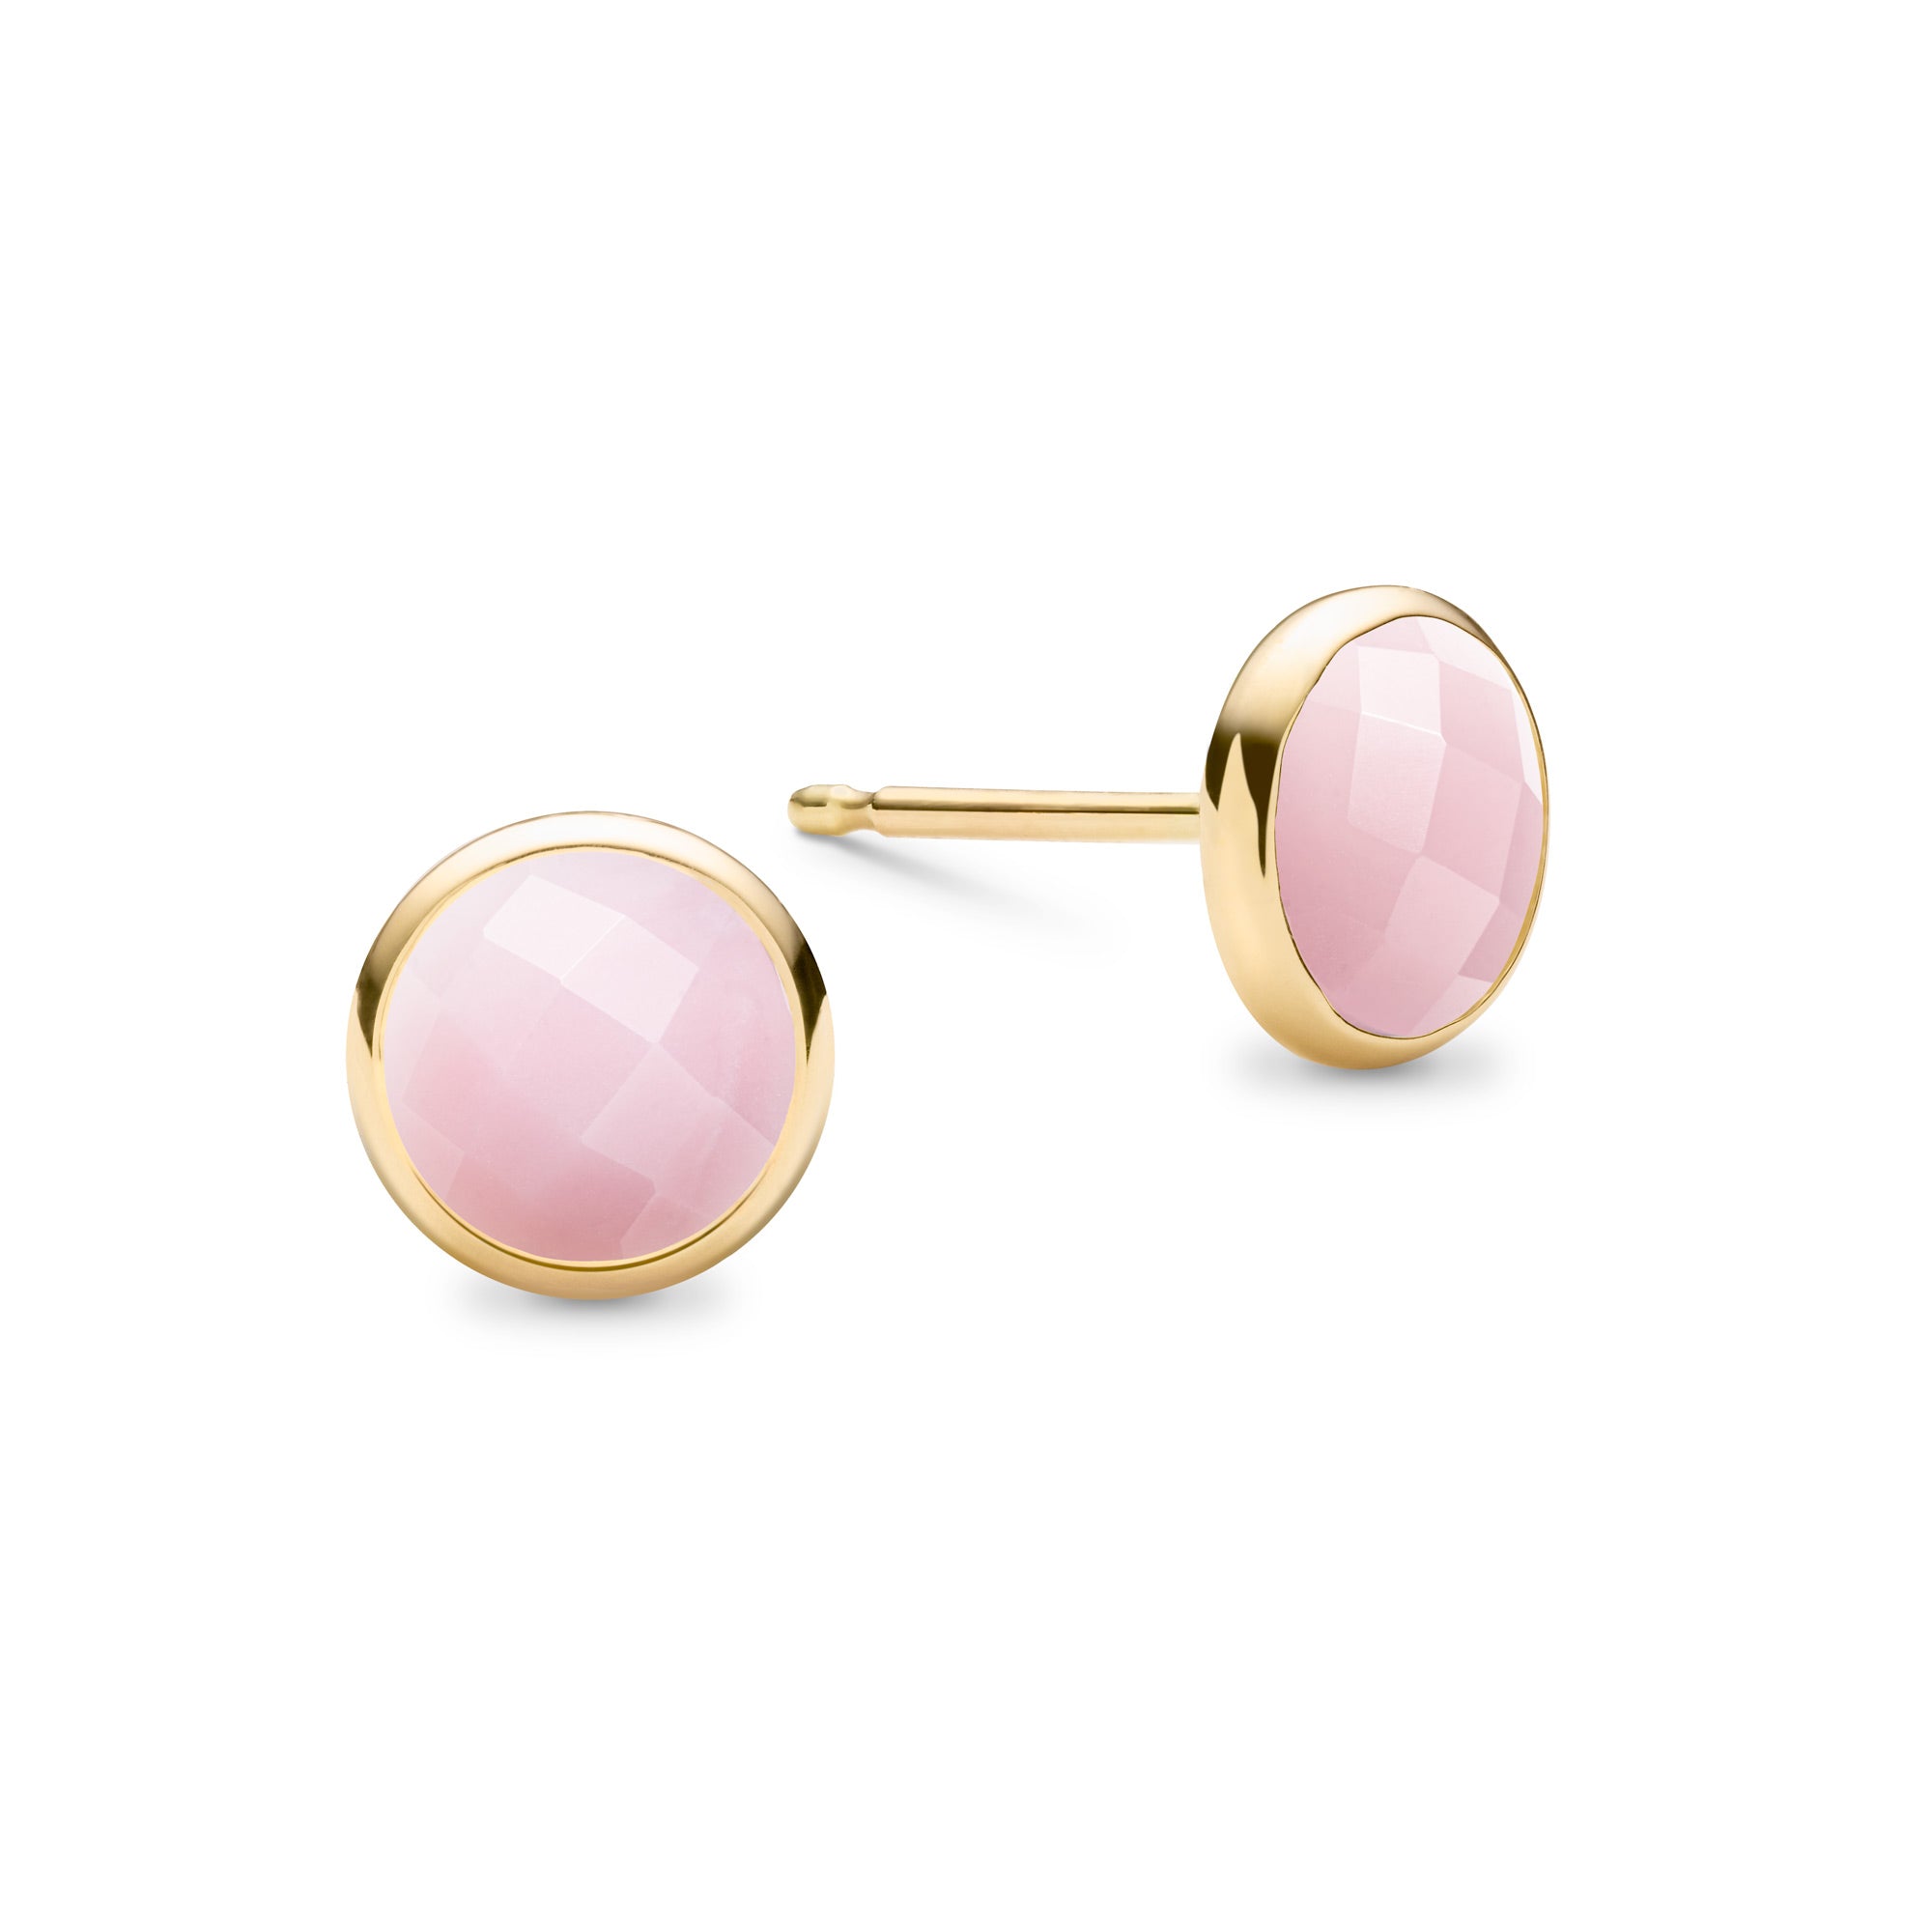 Color Blossom BB Star Ear Studs, Pink gold, pink Mother of pearl and  diamonds - Jewelry - Categories